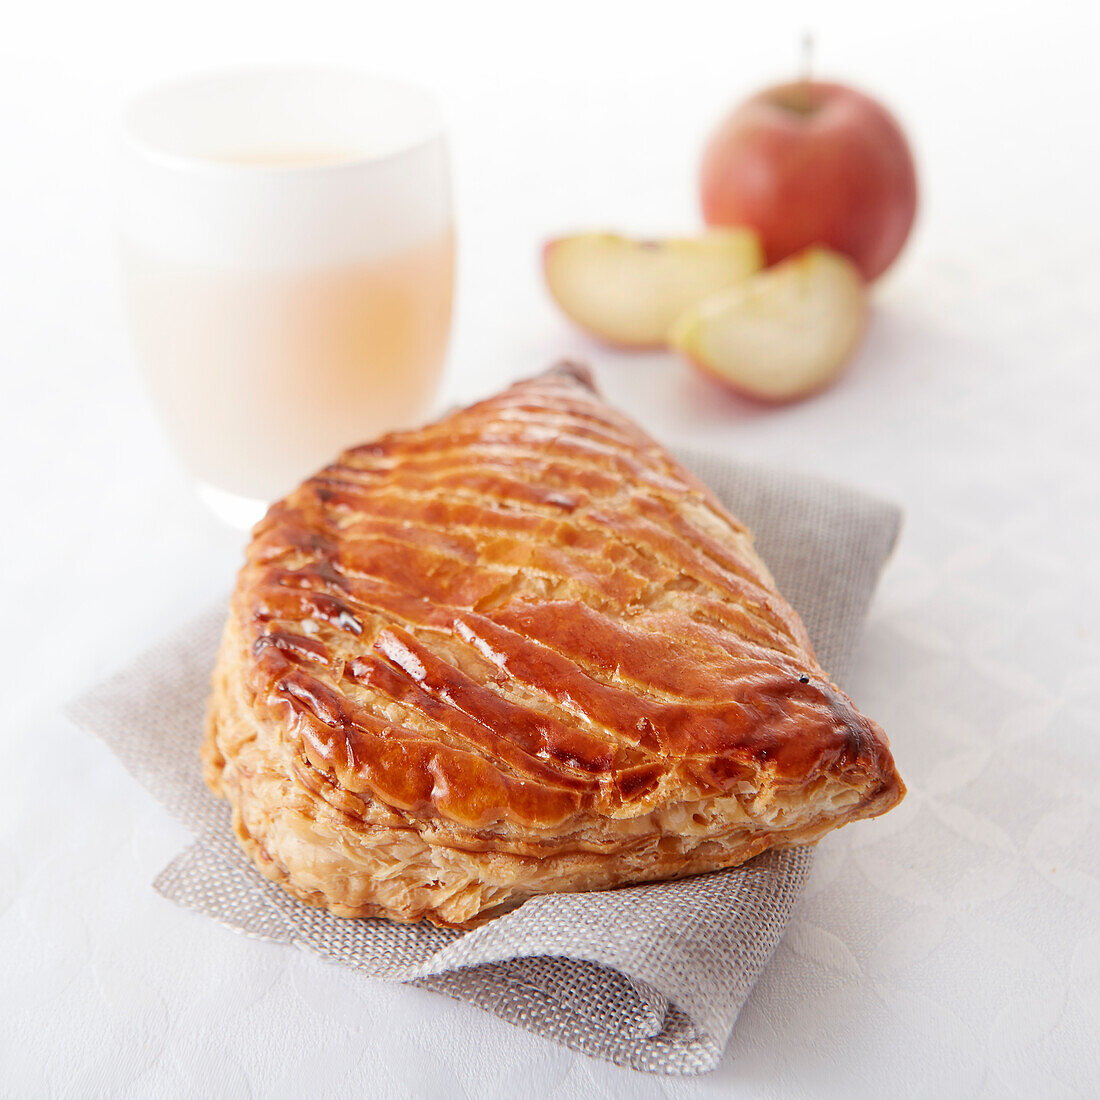 Chaussons aux pommes (apple turnover, France)